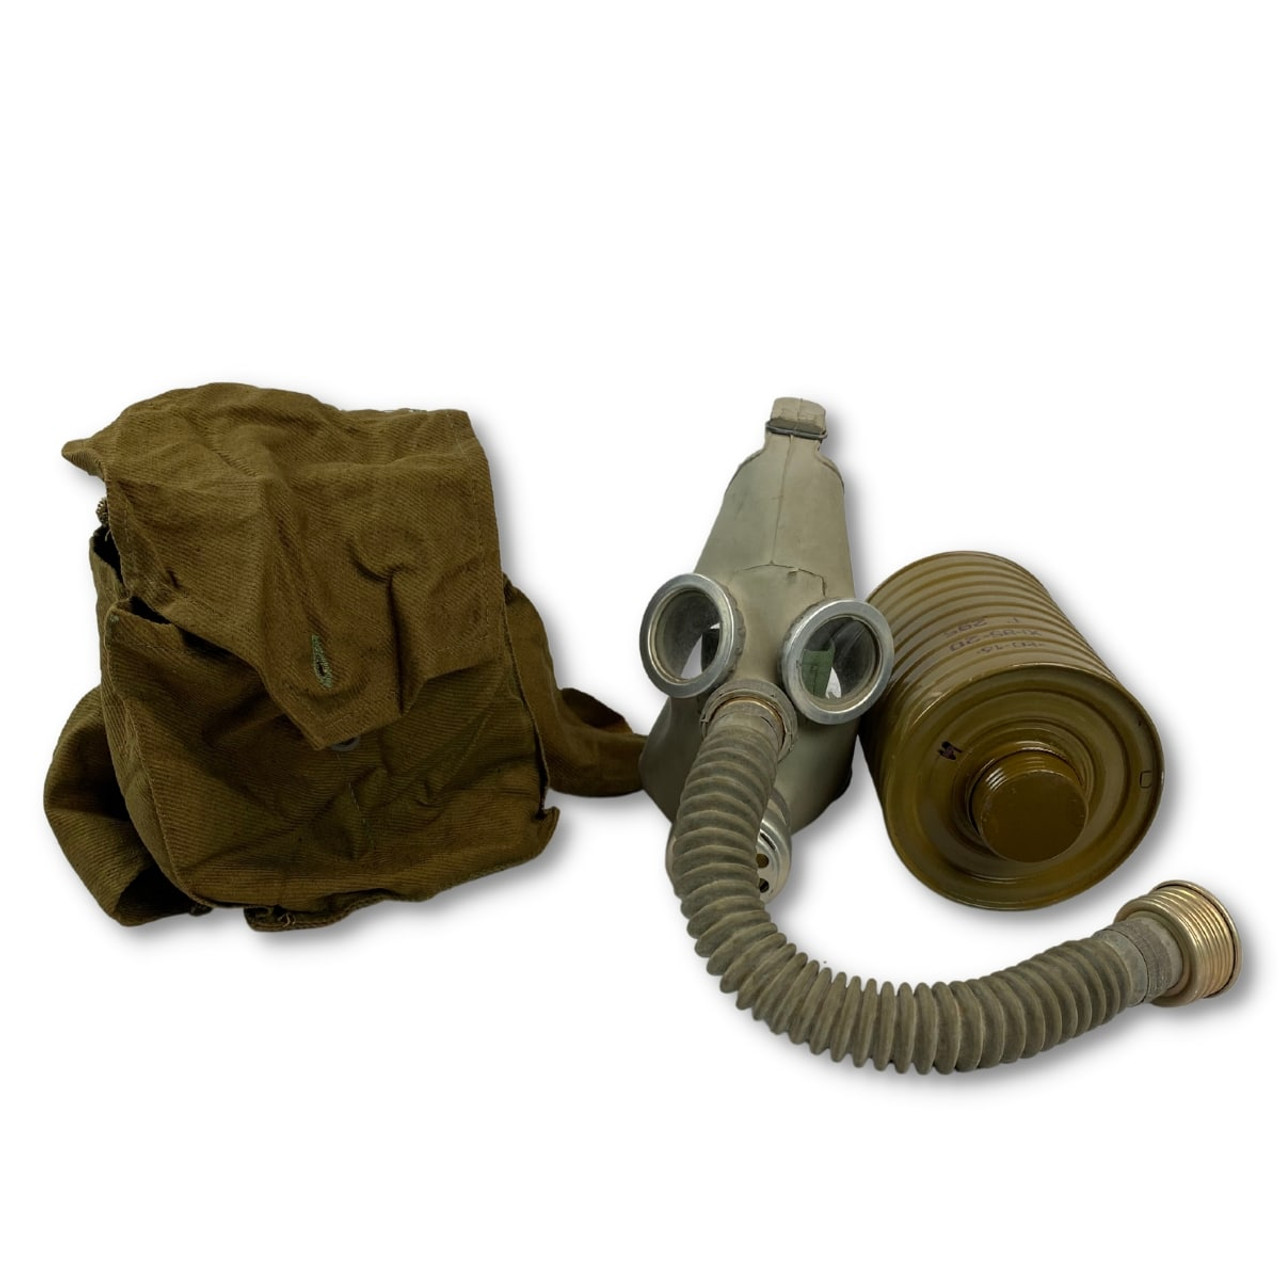 Soviet Mask PDF-D with filter and bag | Military Surplus